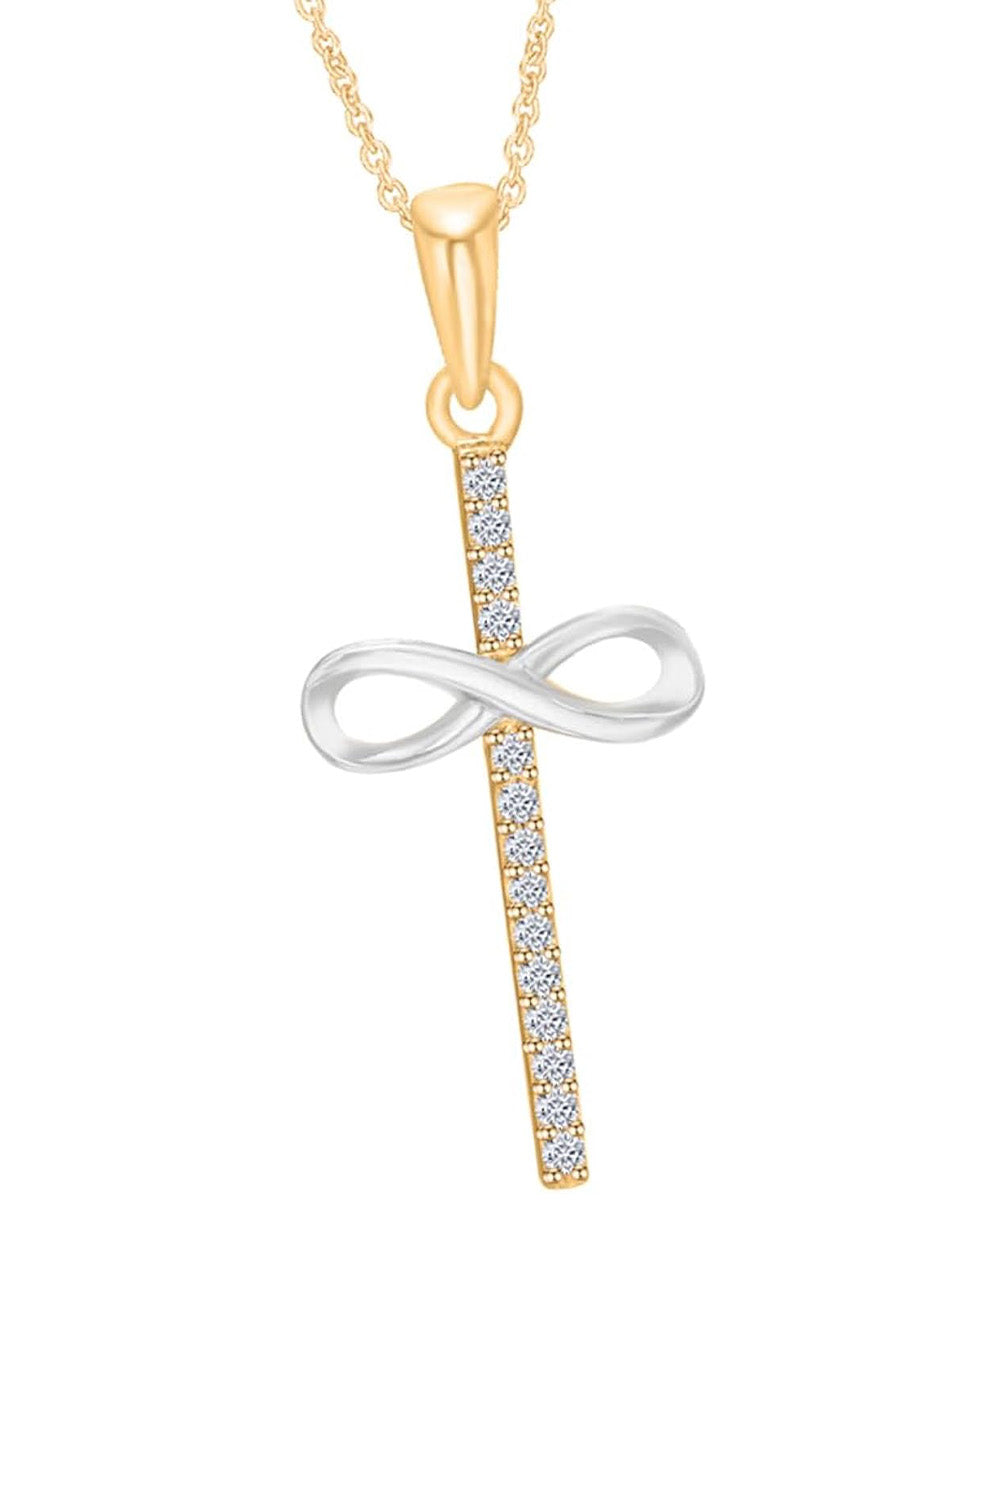 1/4 Carat Moissanite Infinity Cross Pendant Necklace in 18K Two Tone Gold Plated Sterling Silver.